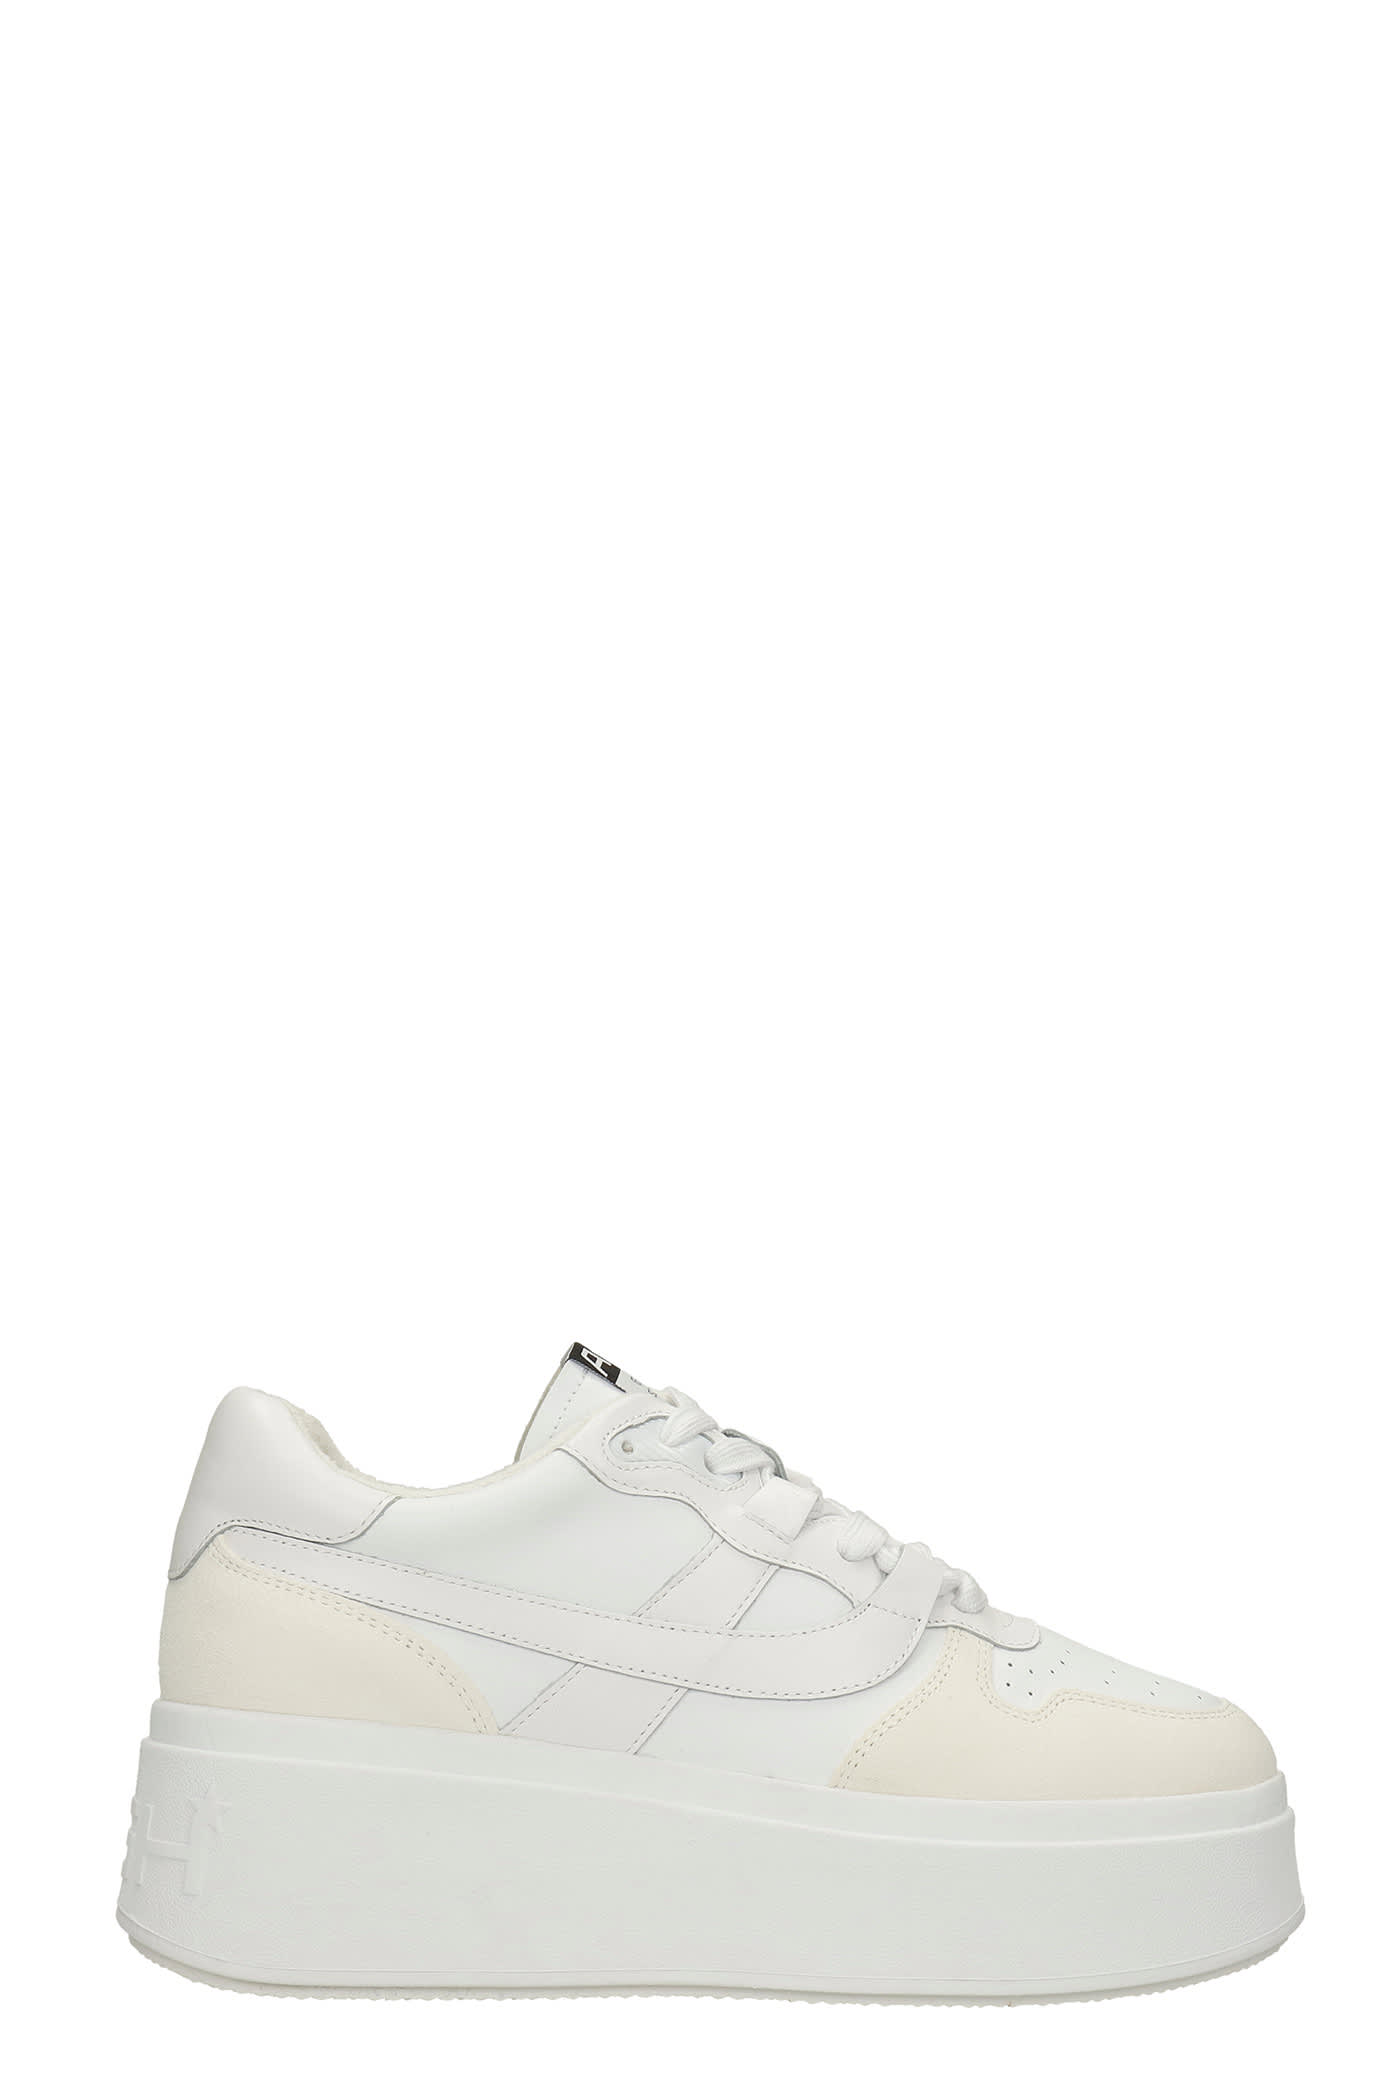 Ash Match Sneakers In White Leather